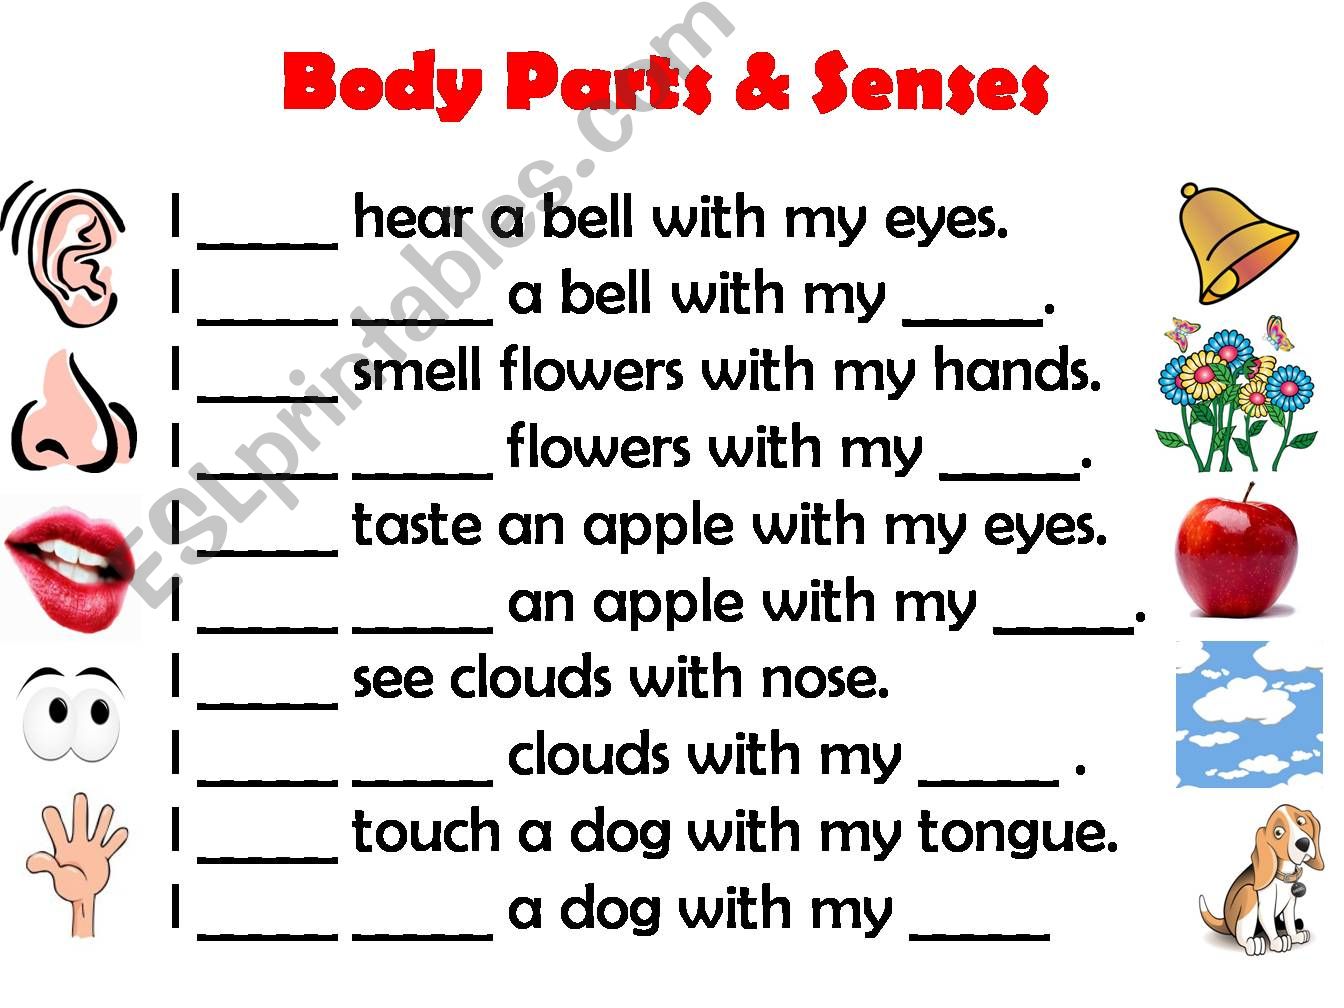 Body Parts and Senses Game powerpoint